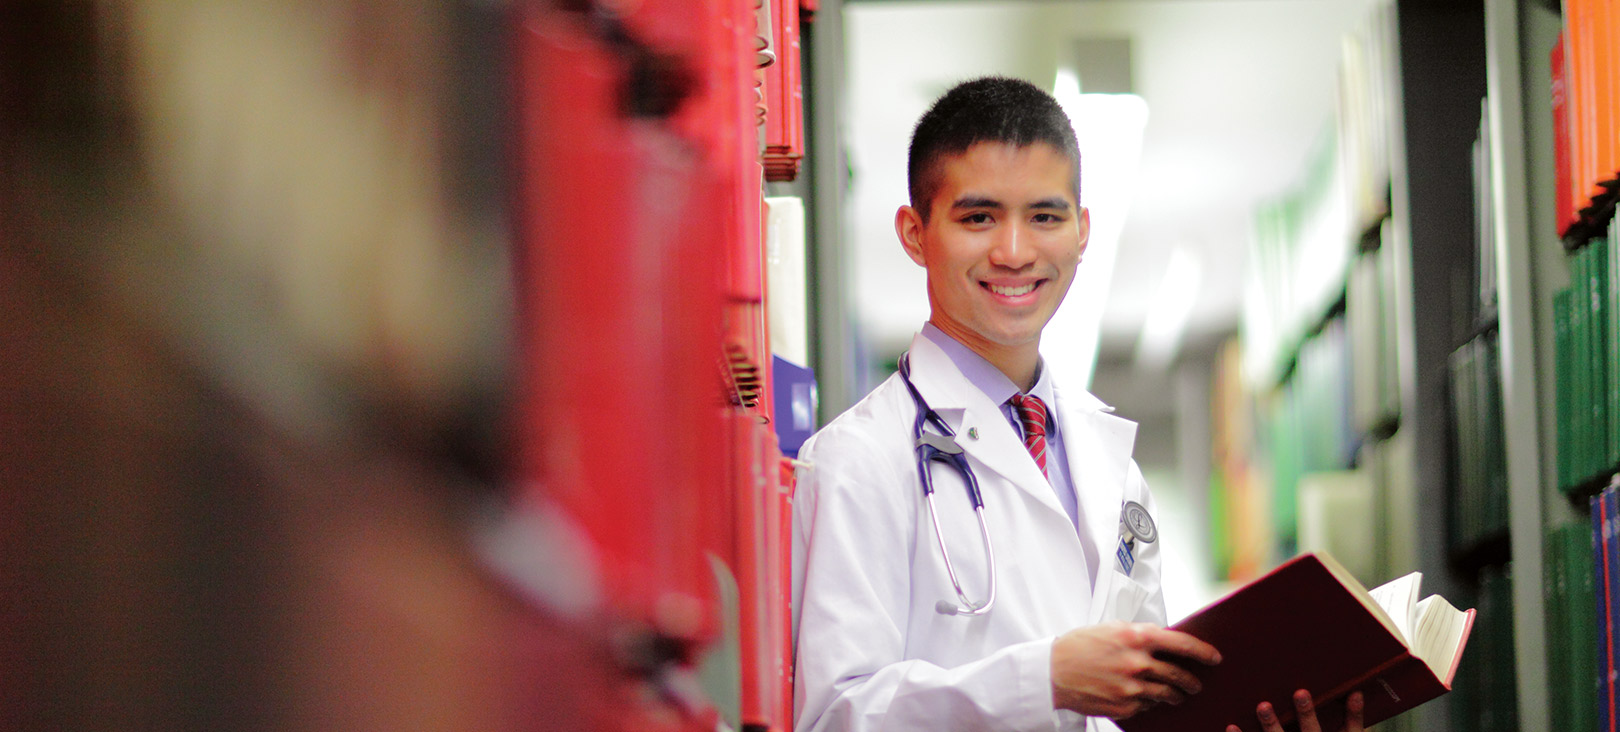 Pre-Health Professions Advising Biochemistry student wearing a stethoscope and holding a book.jpg